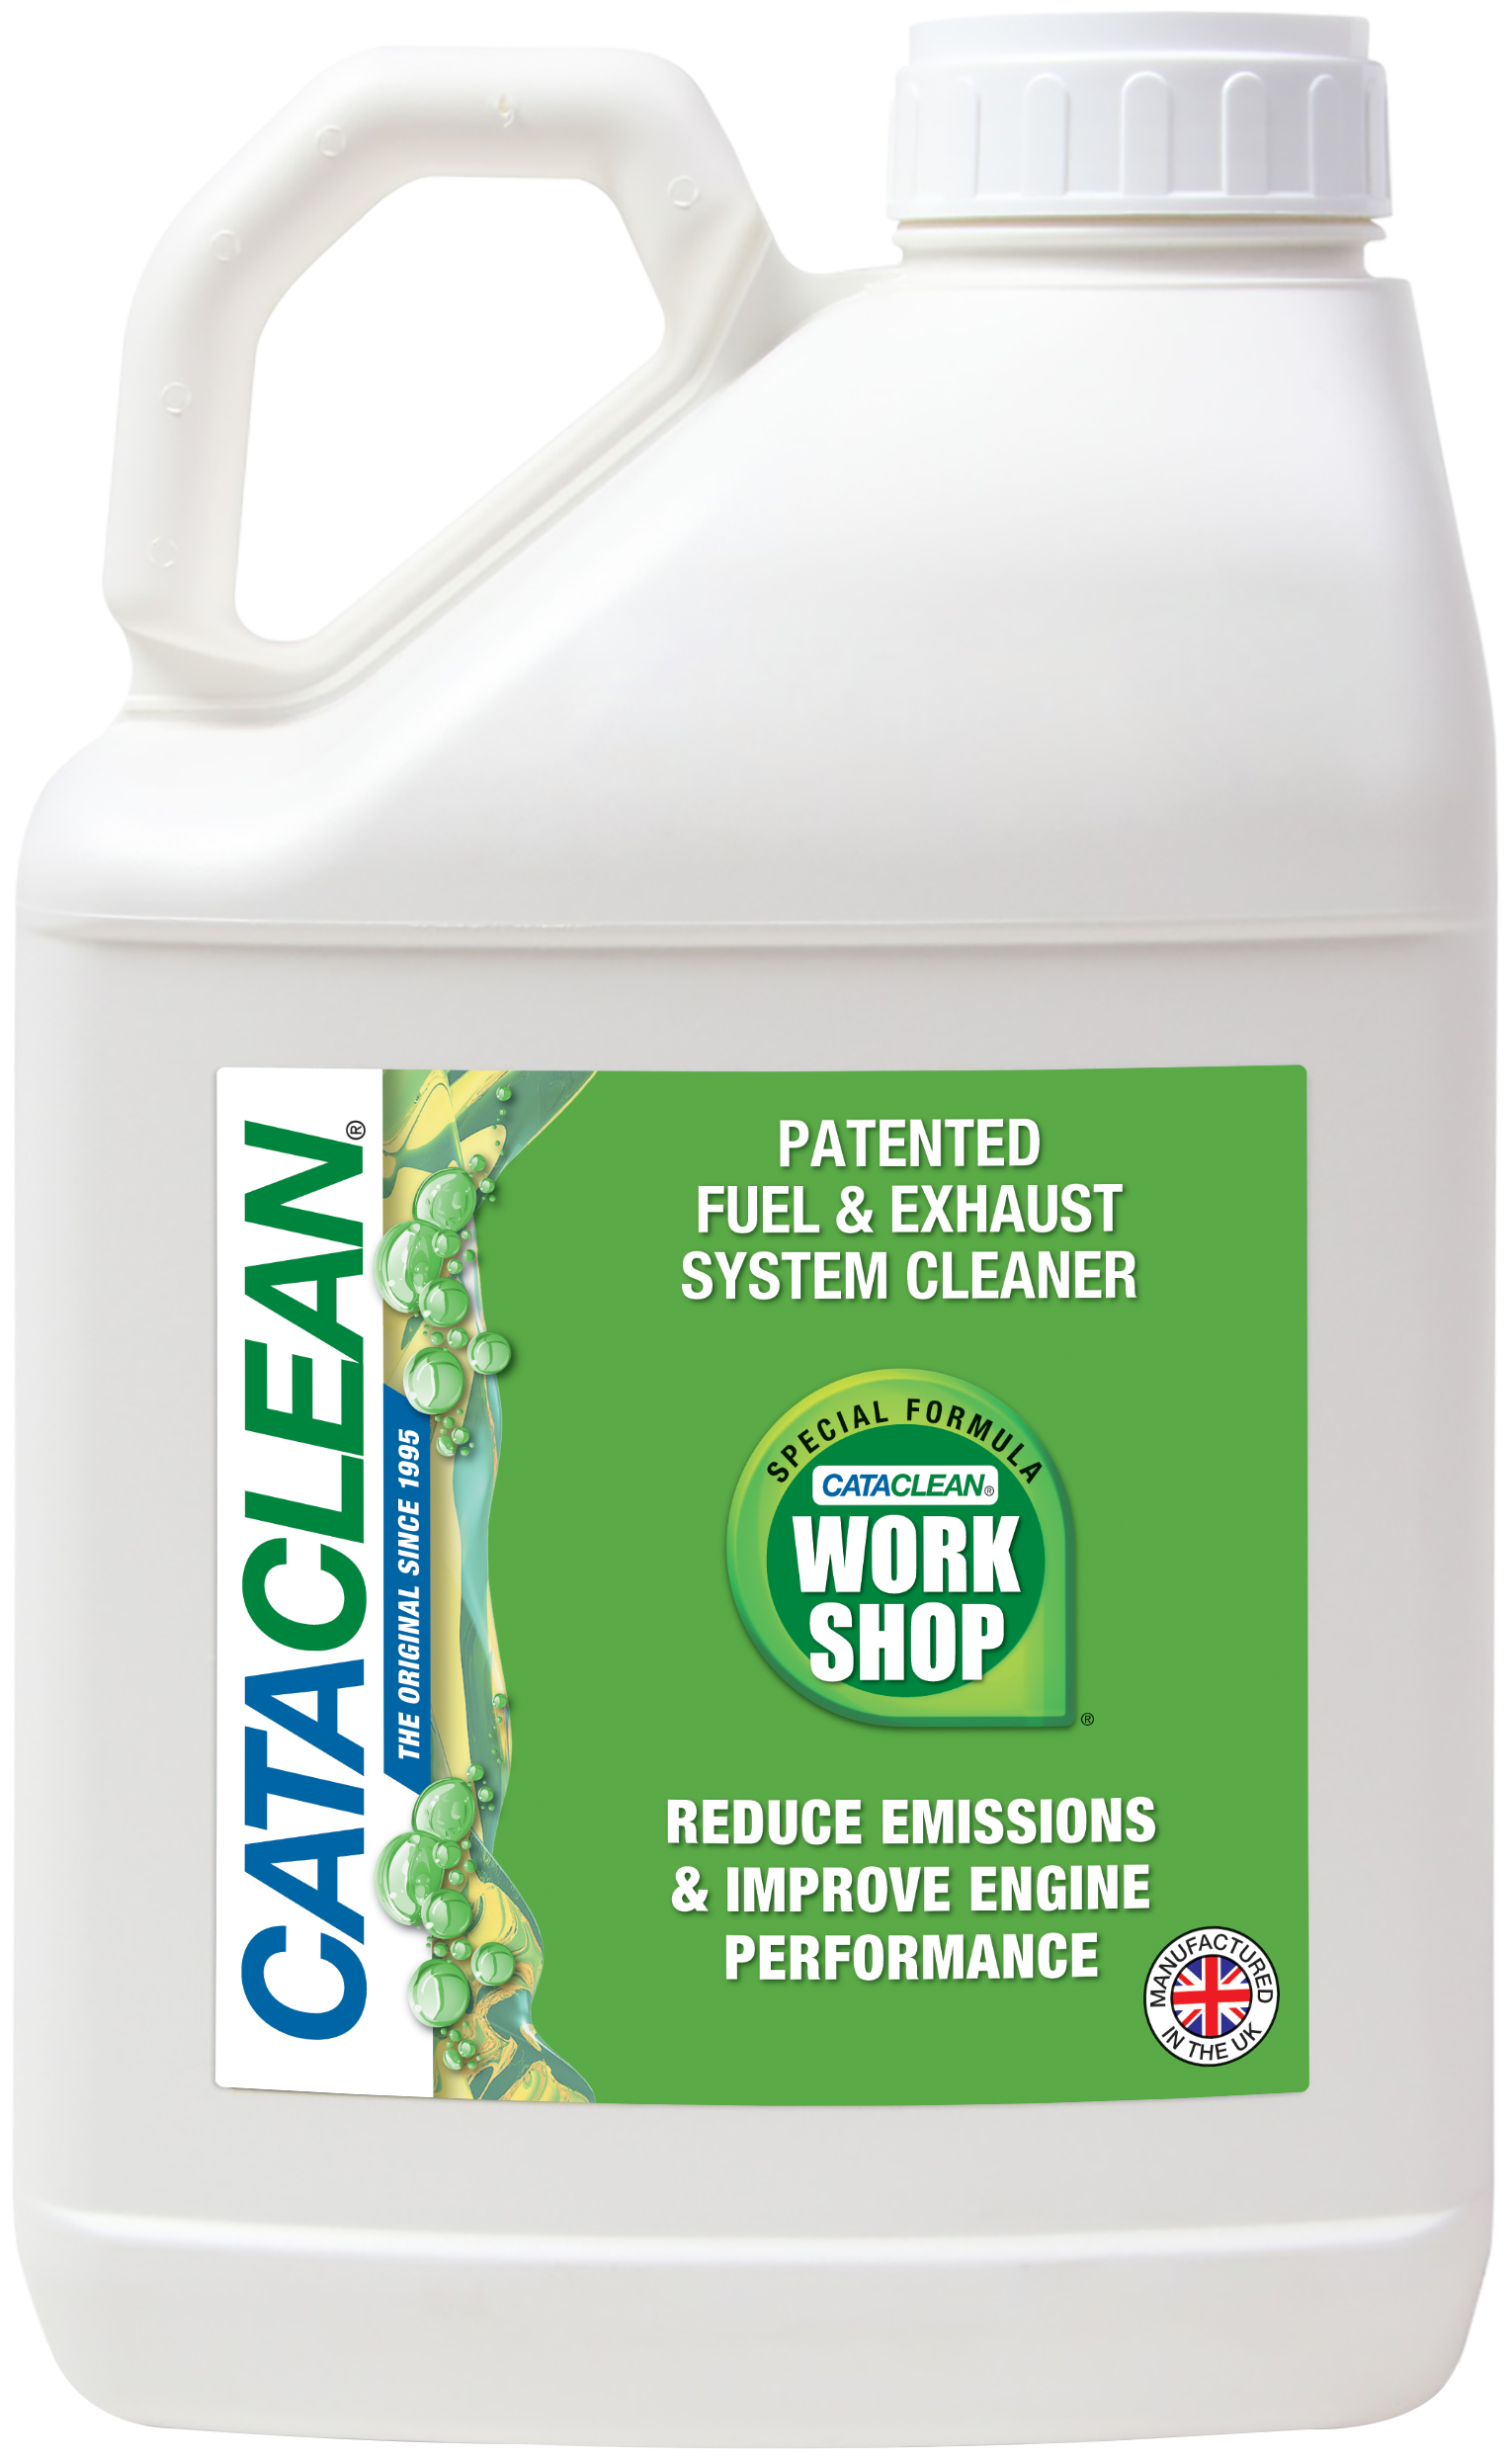 How To Use Cataclean 